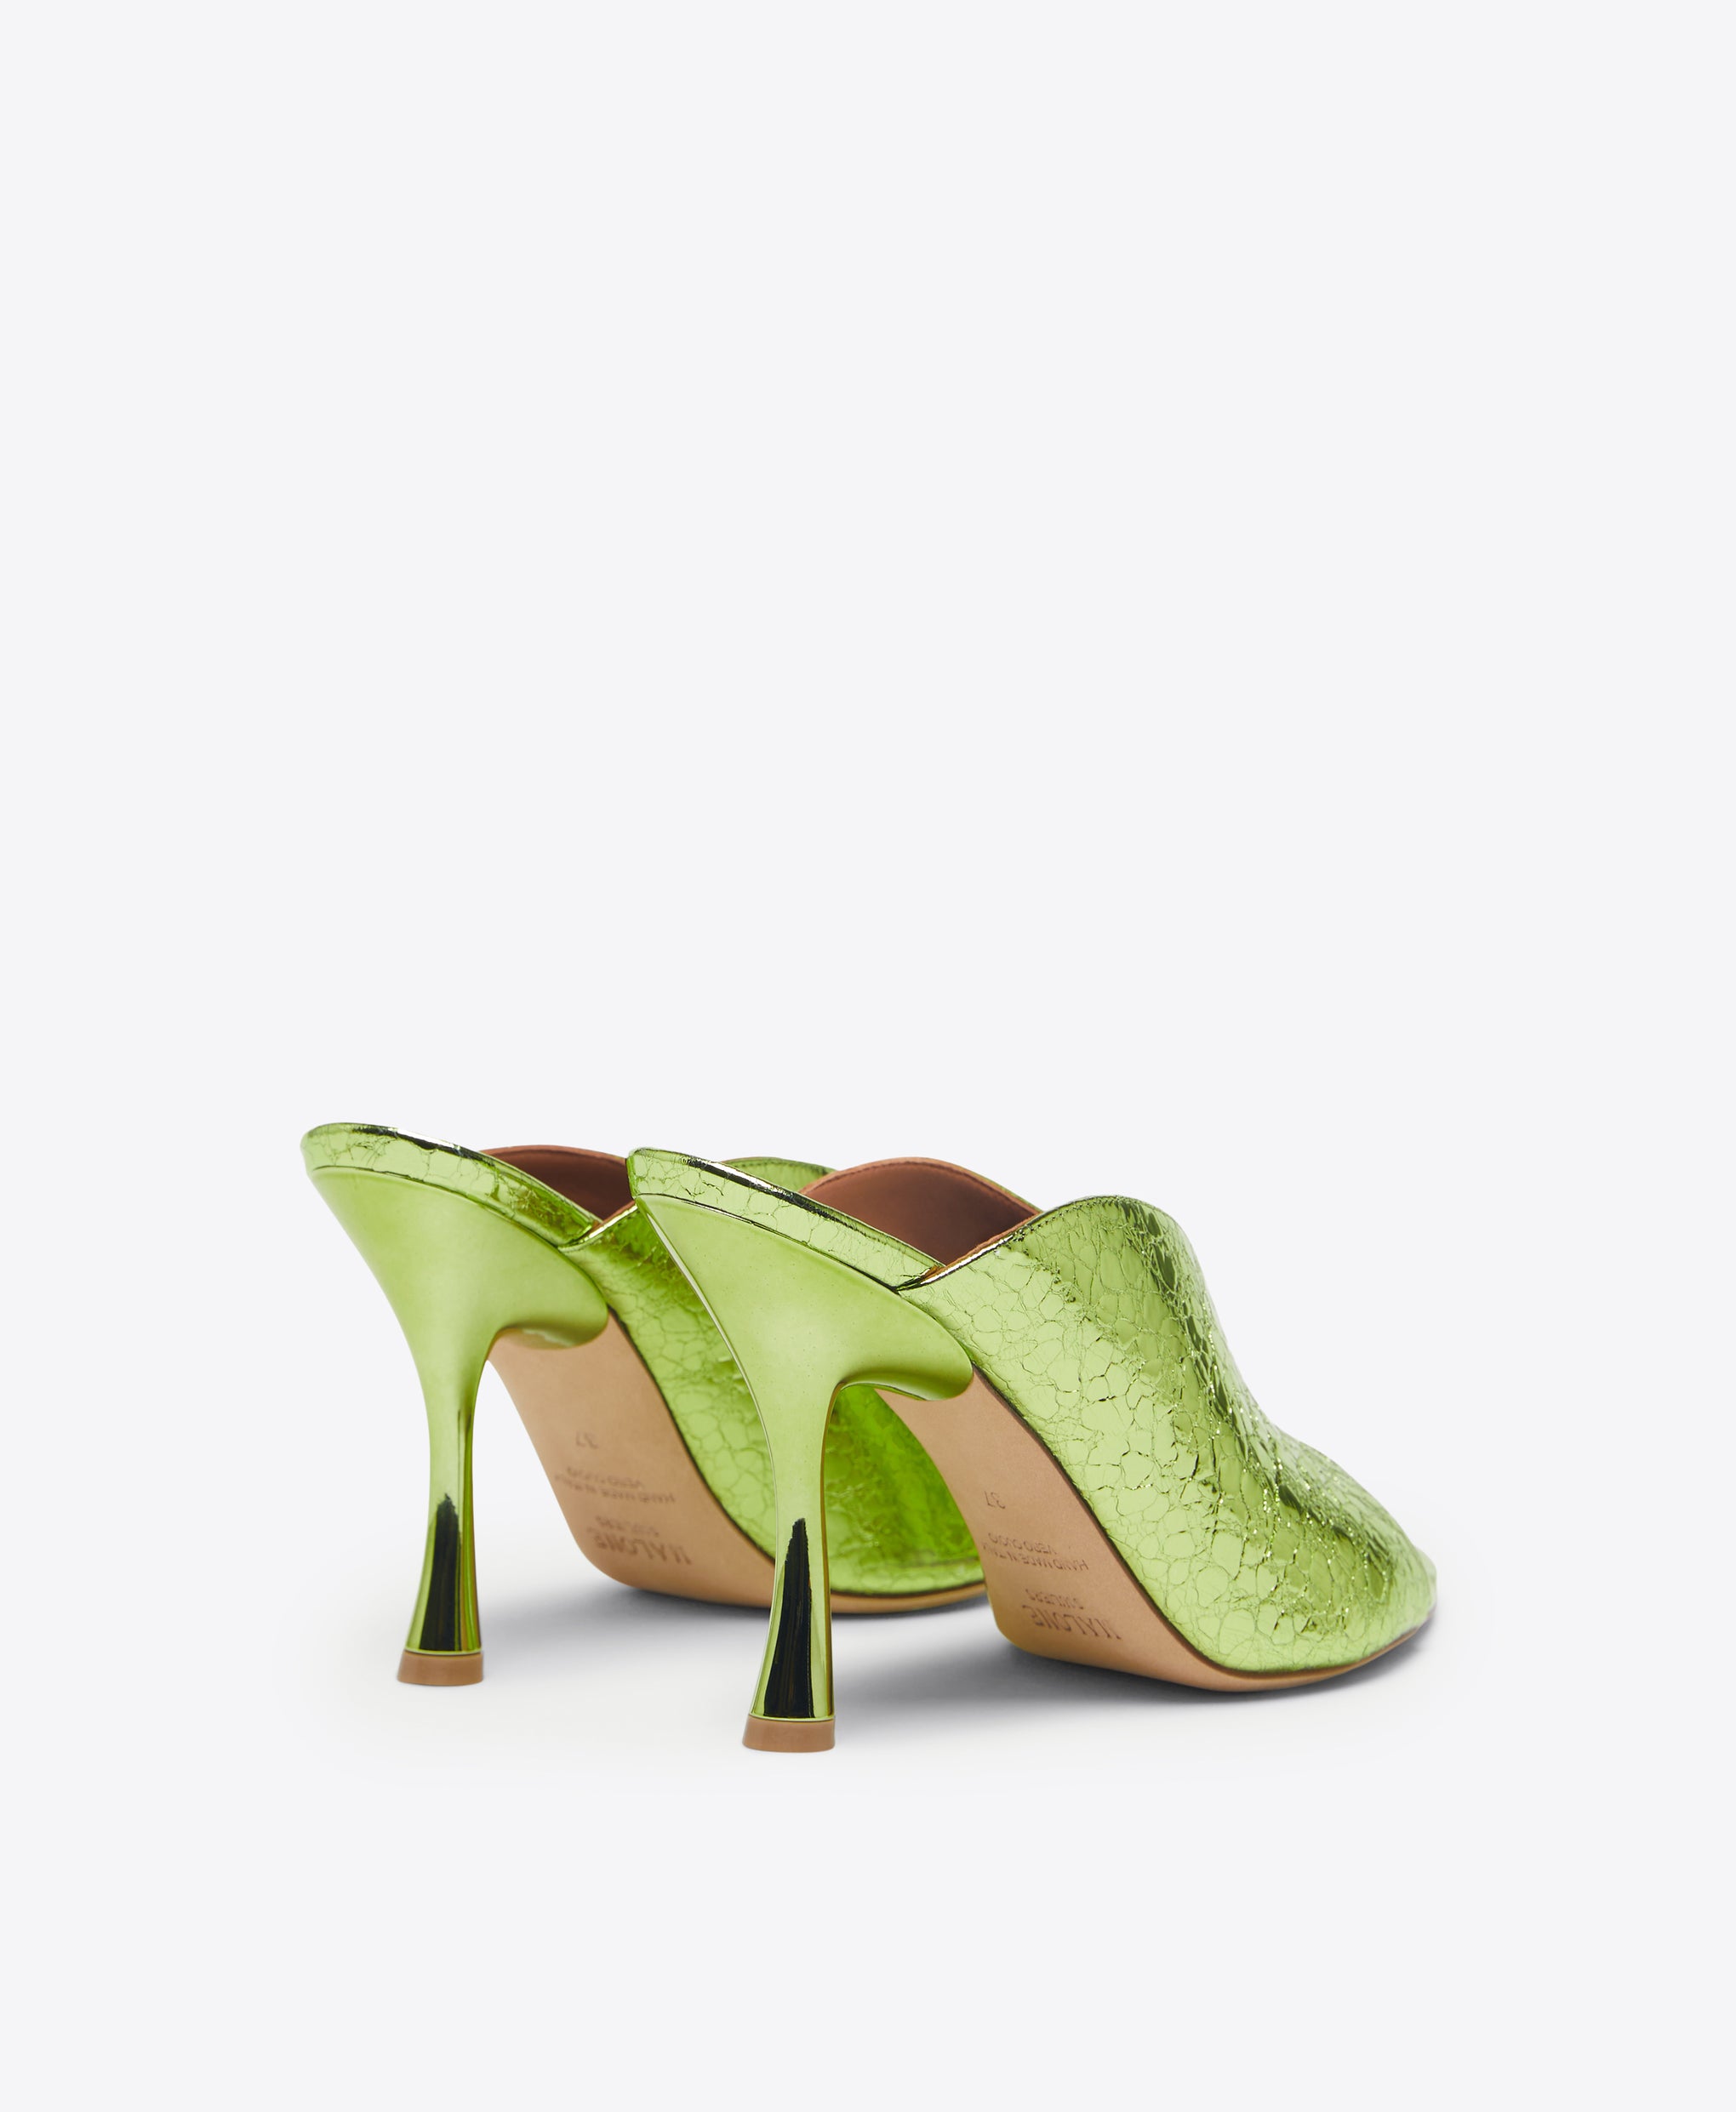 Malone Souliers Henri 90mm Green Mirror Leather Heeled Sandals 